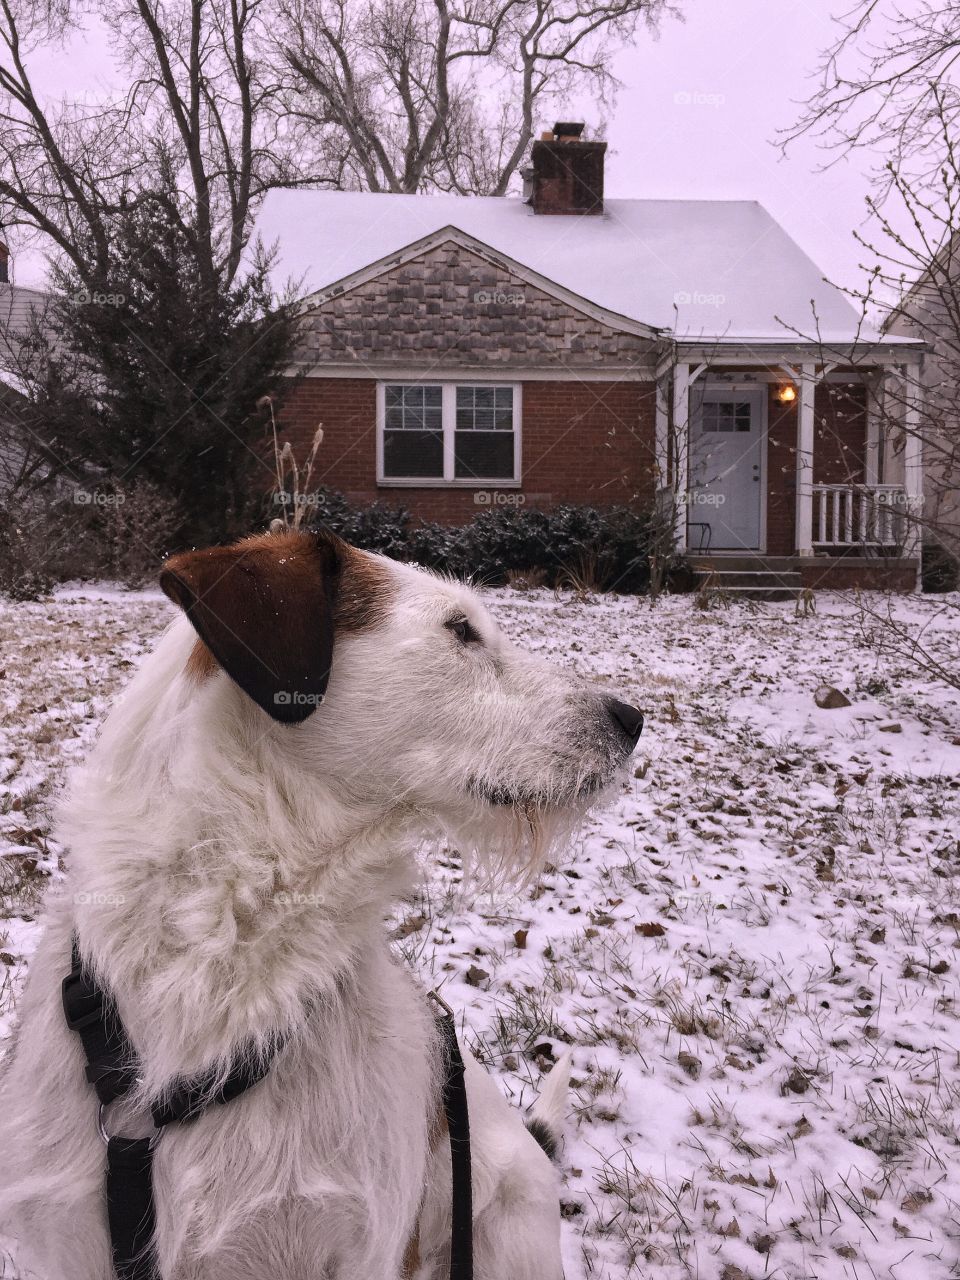 Red and white terrier in snowy scene 